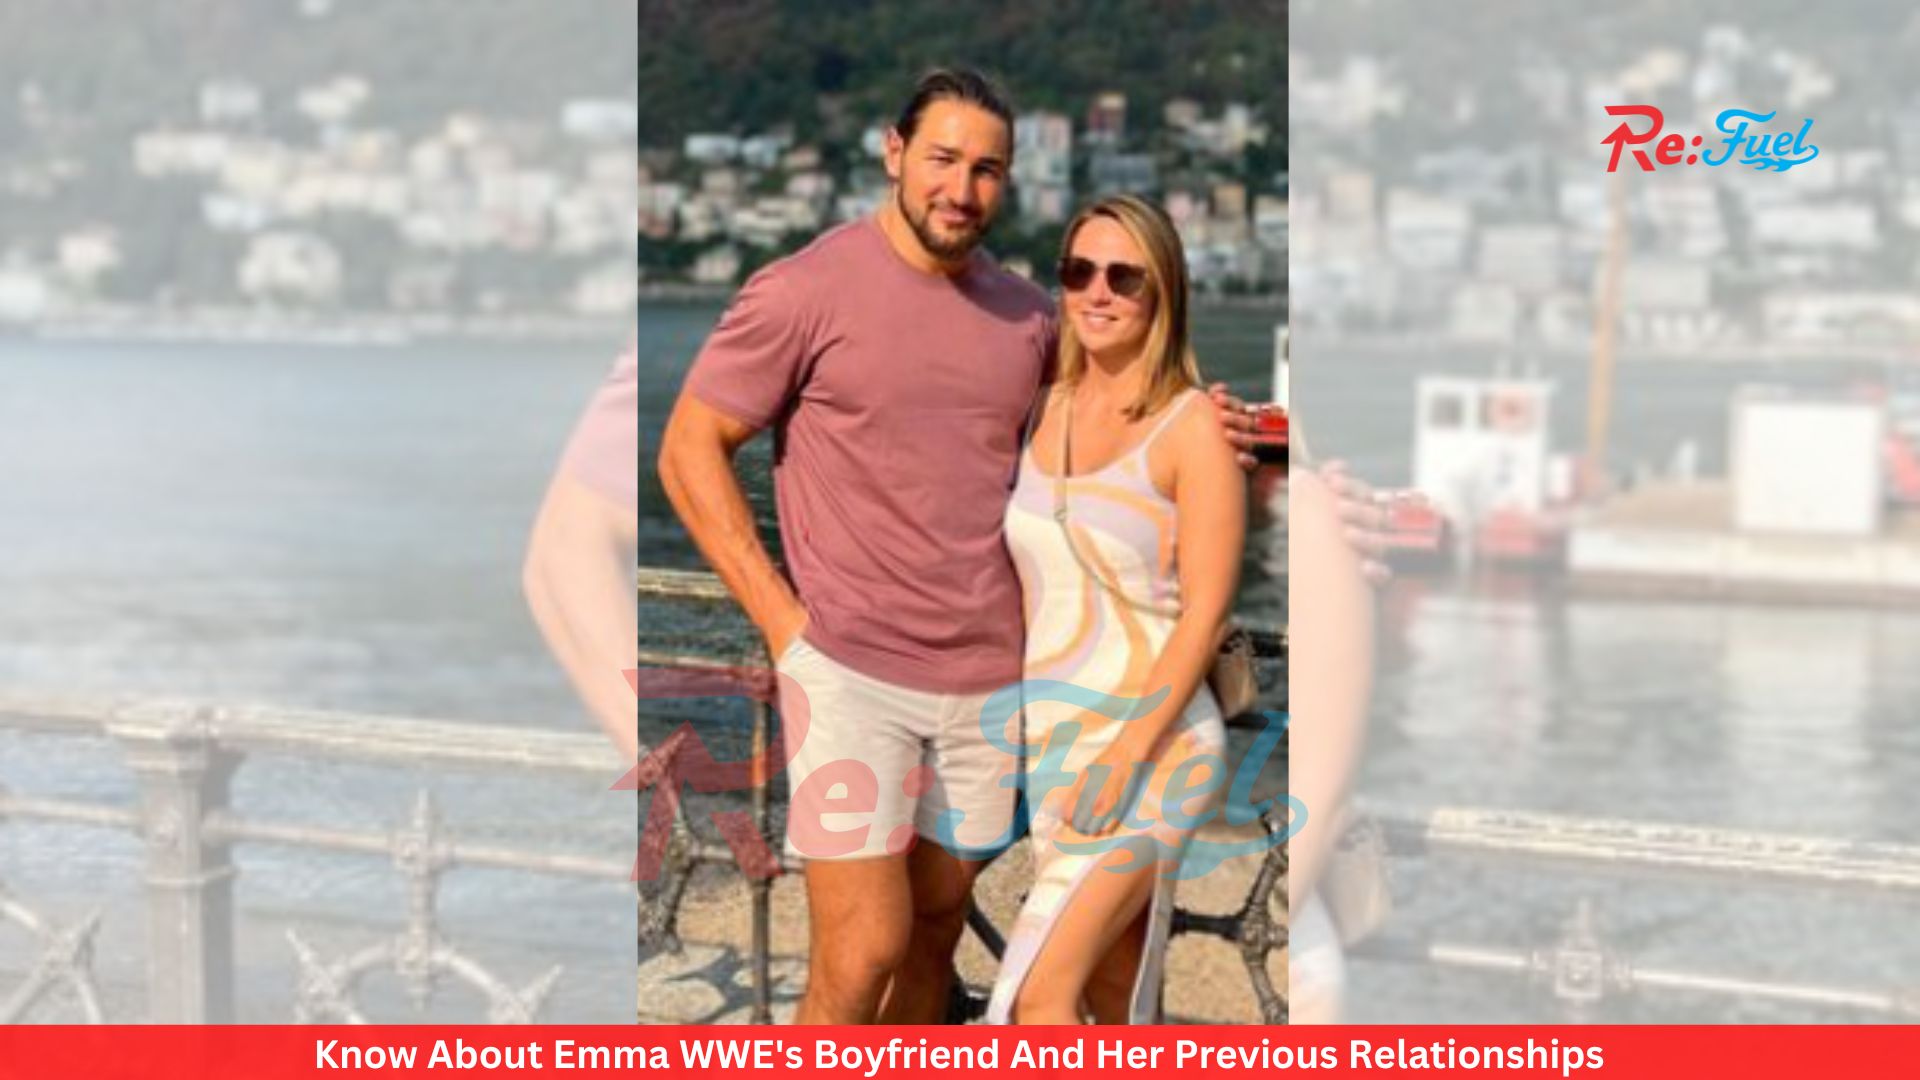 Know About Emma WWE's Boyfriend And Her Previous Relationships